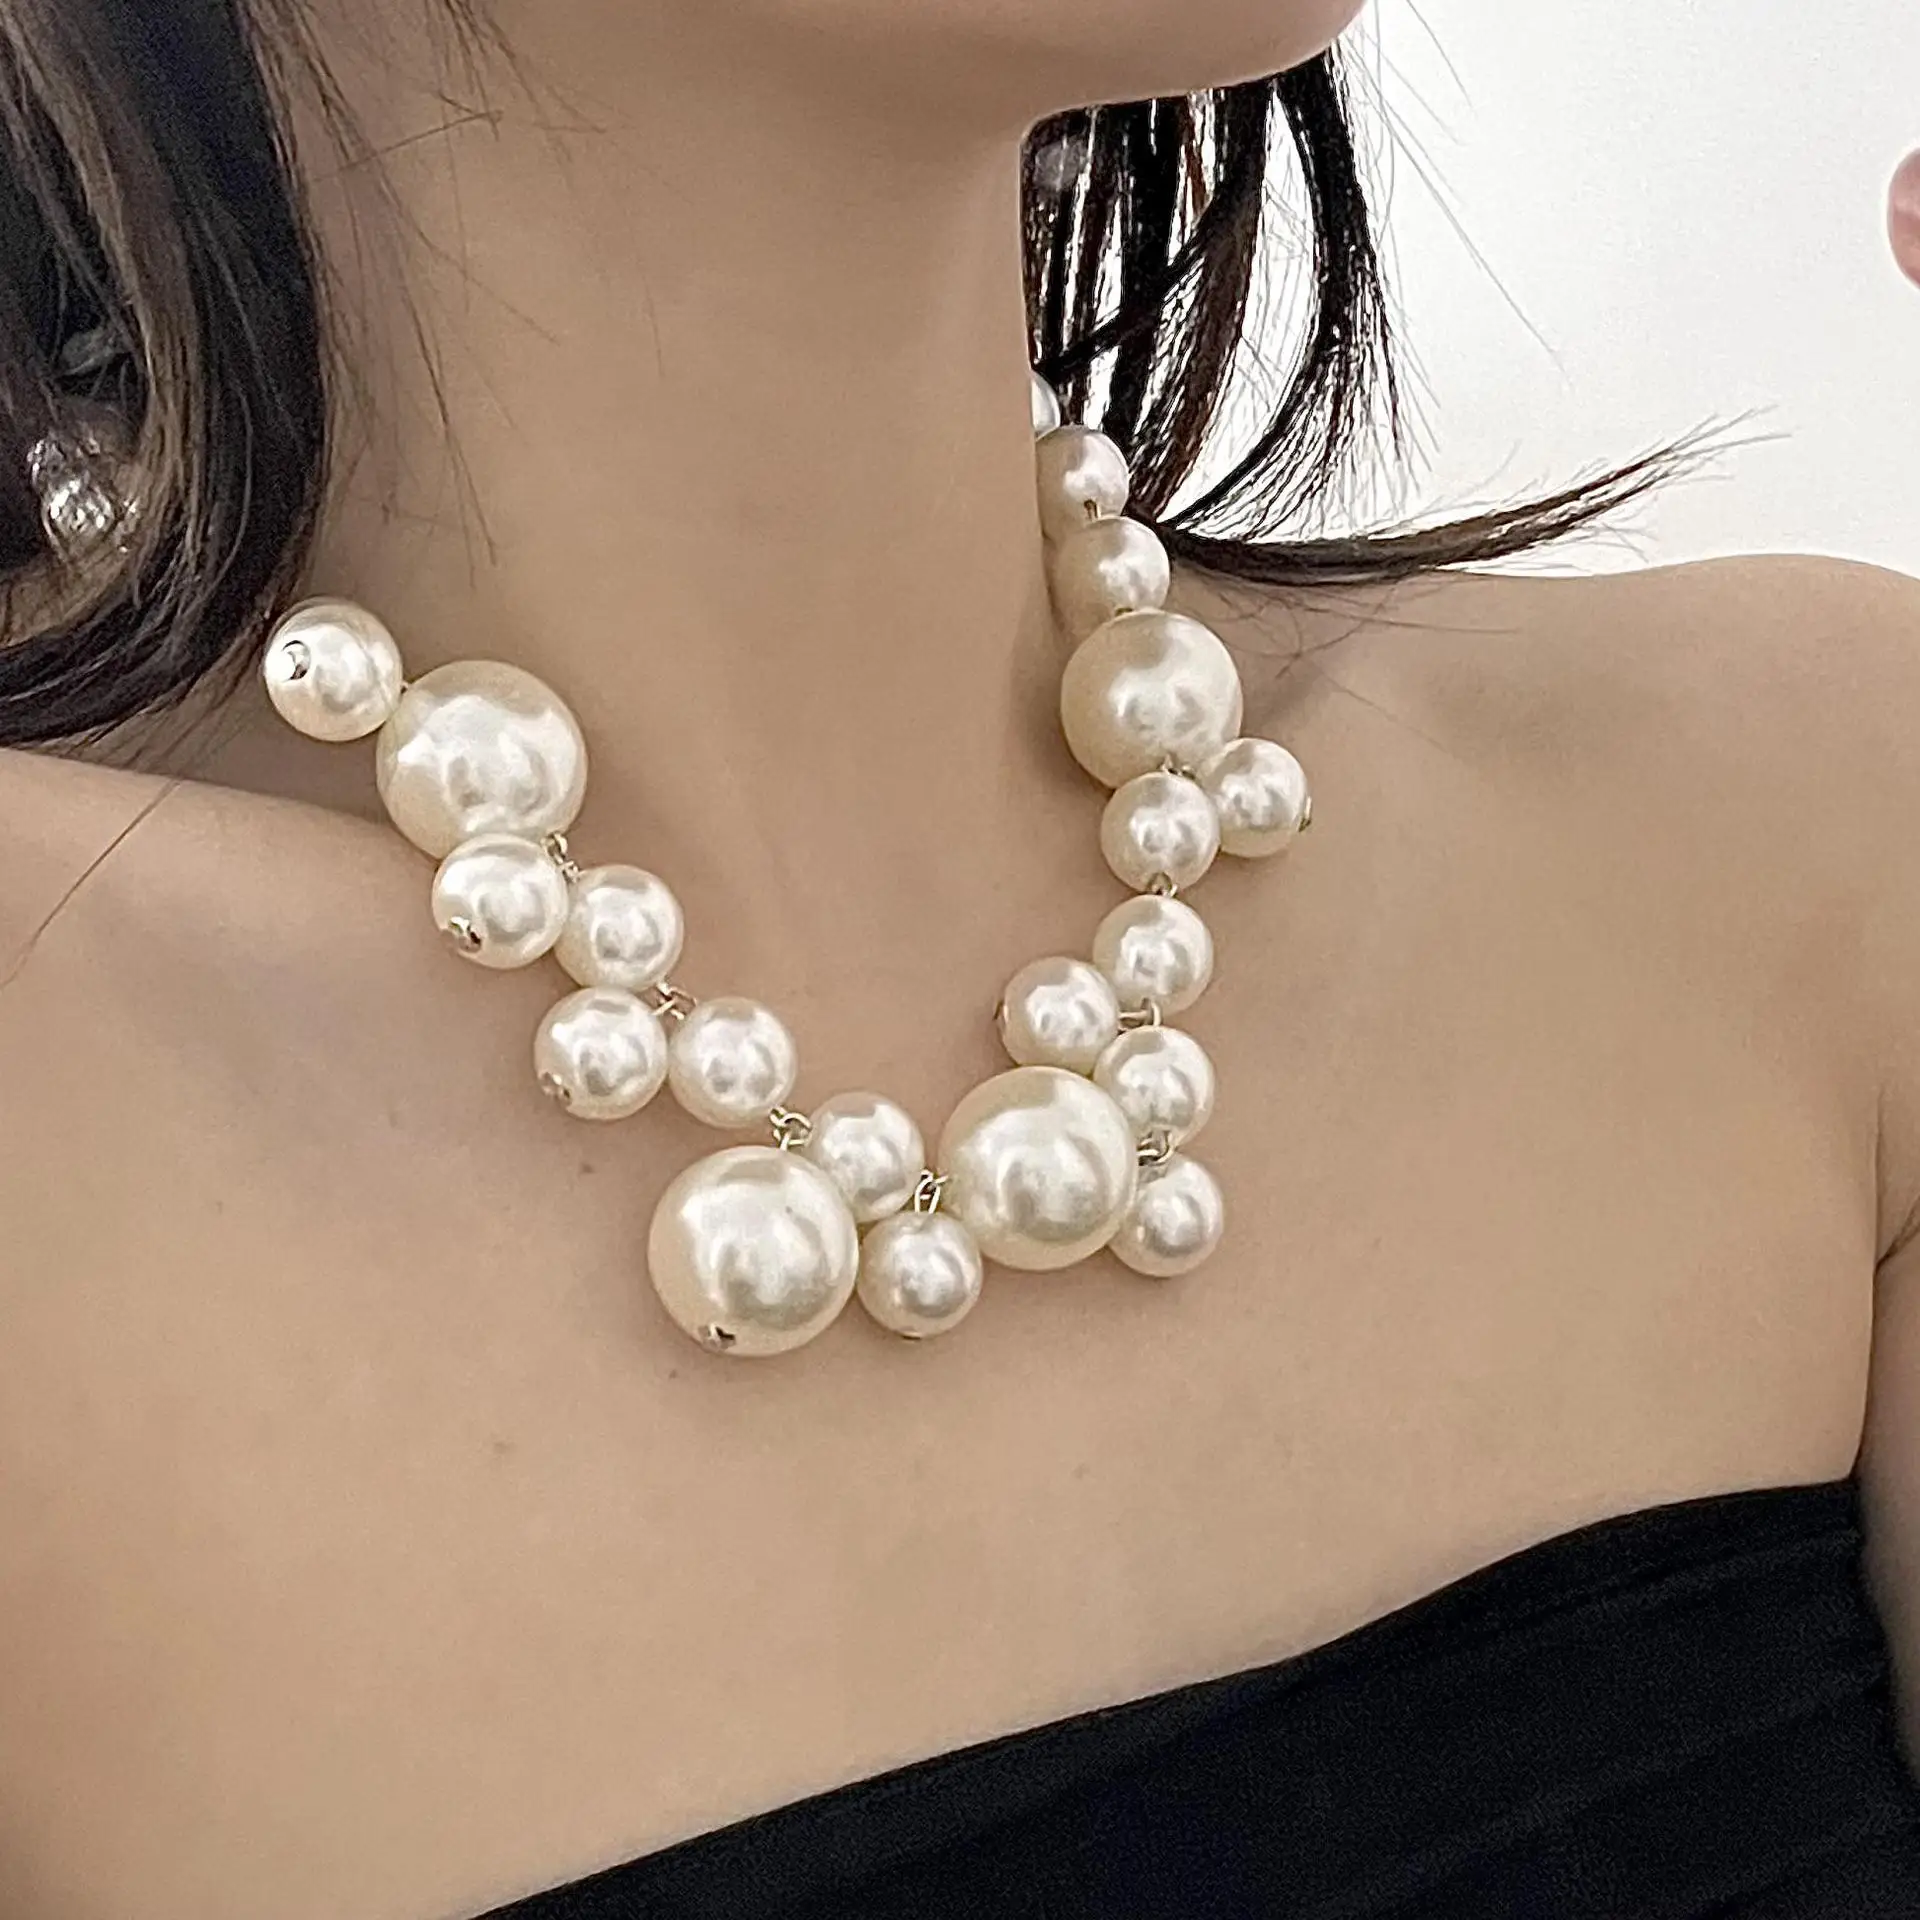 

Trendy Baroque Big Imitation Pearls Choker Necklace Collar Statement Maxi Necklace Women Wedding Bride Jewelry Gifts